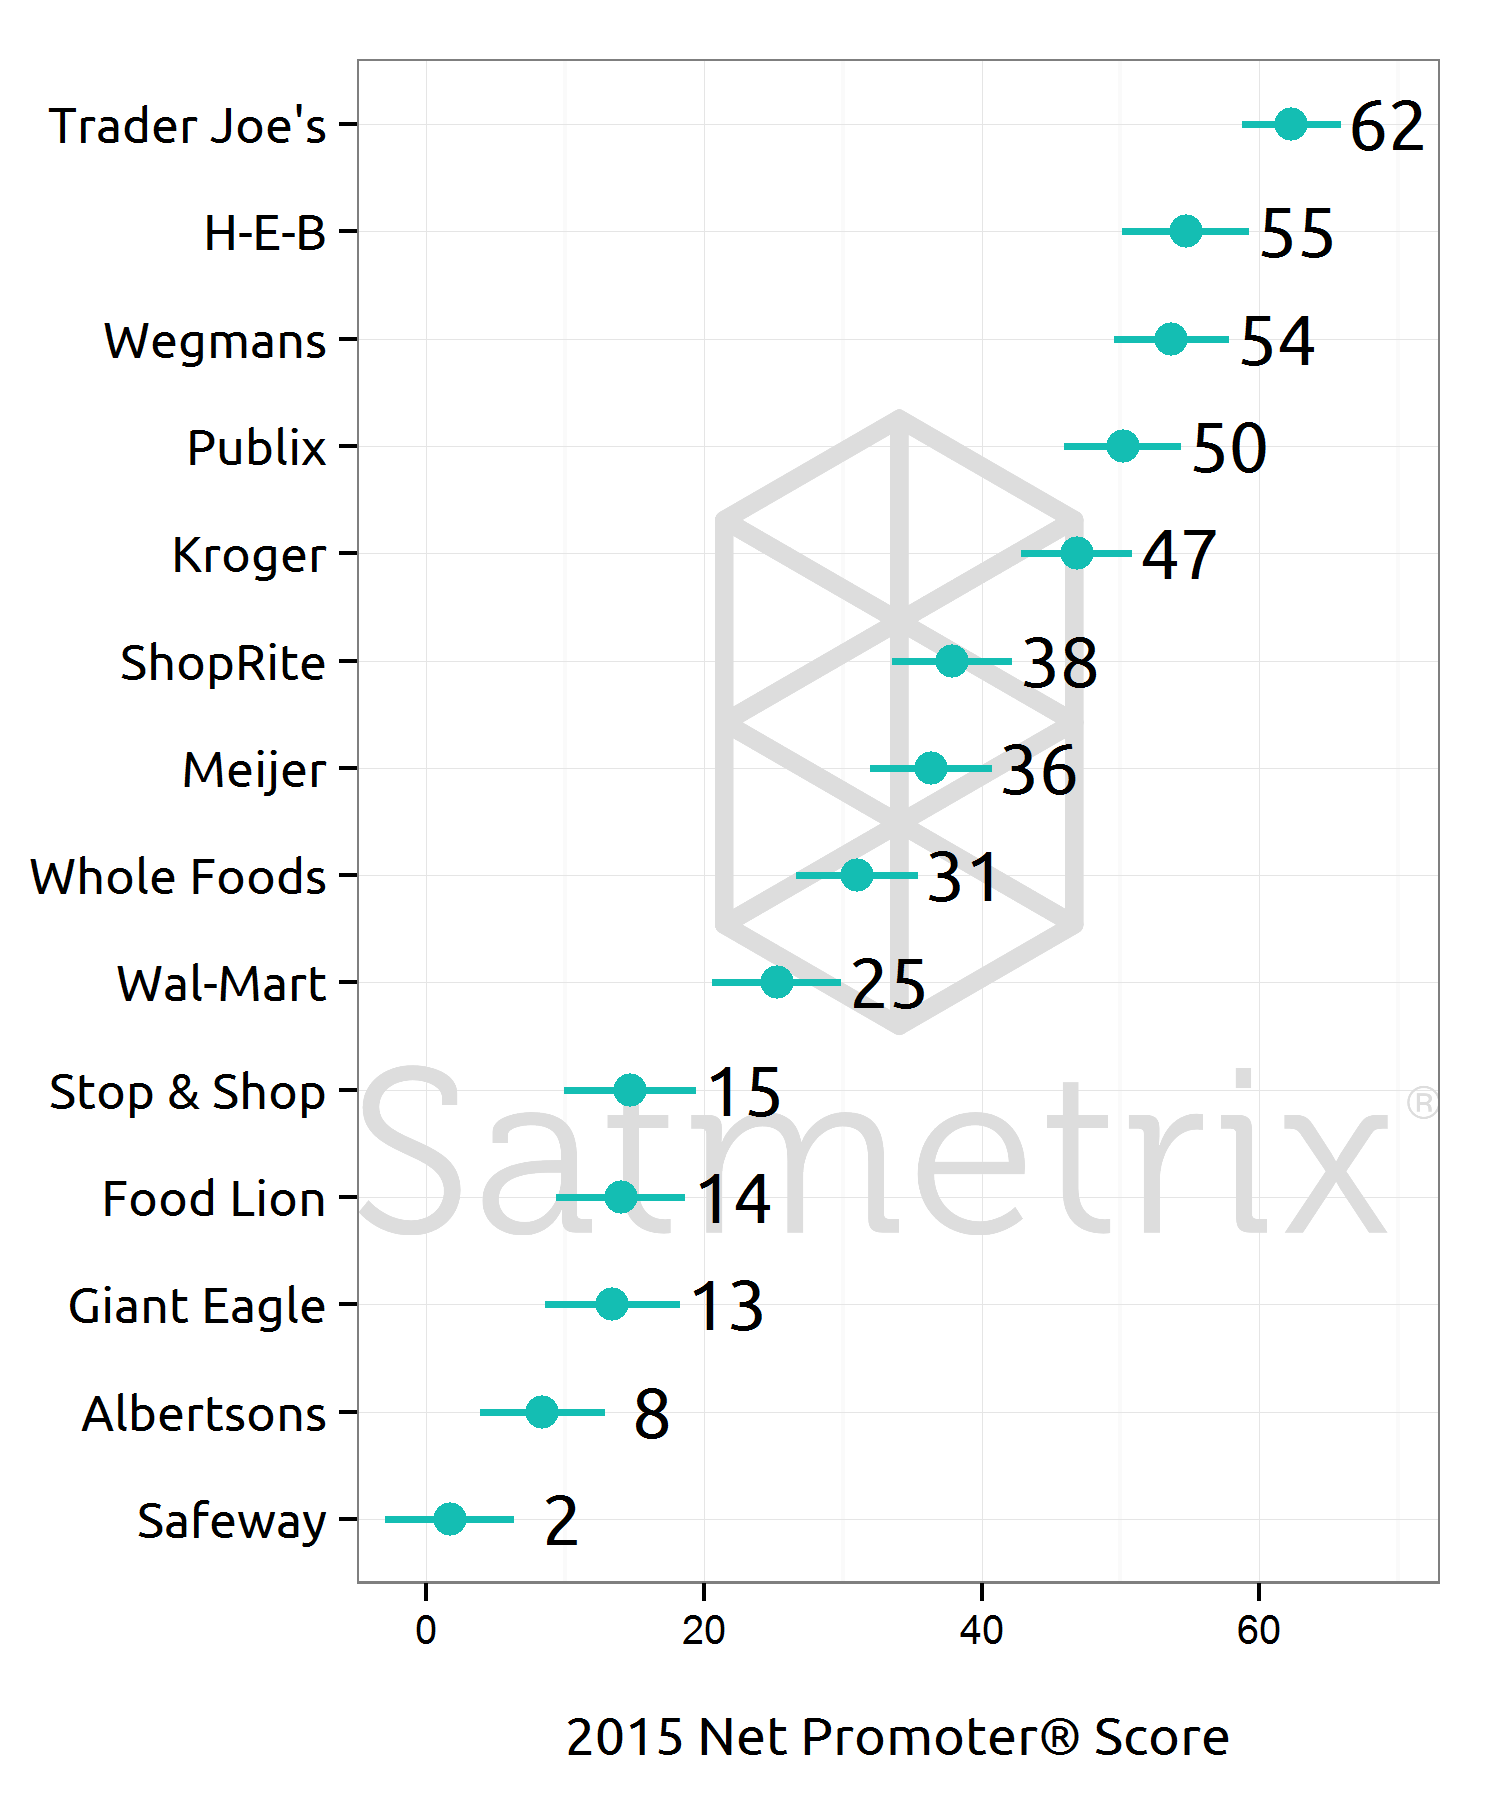 2015 Net Promoter Scores for Grocery Stores and Supermarkets, from highest to lowest. Net Promoter scores are illustrated with dots, and standard error of the NPS statistic is plotted as a horizontal line either side.